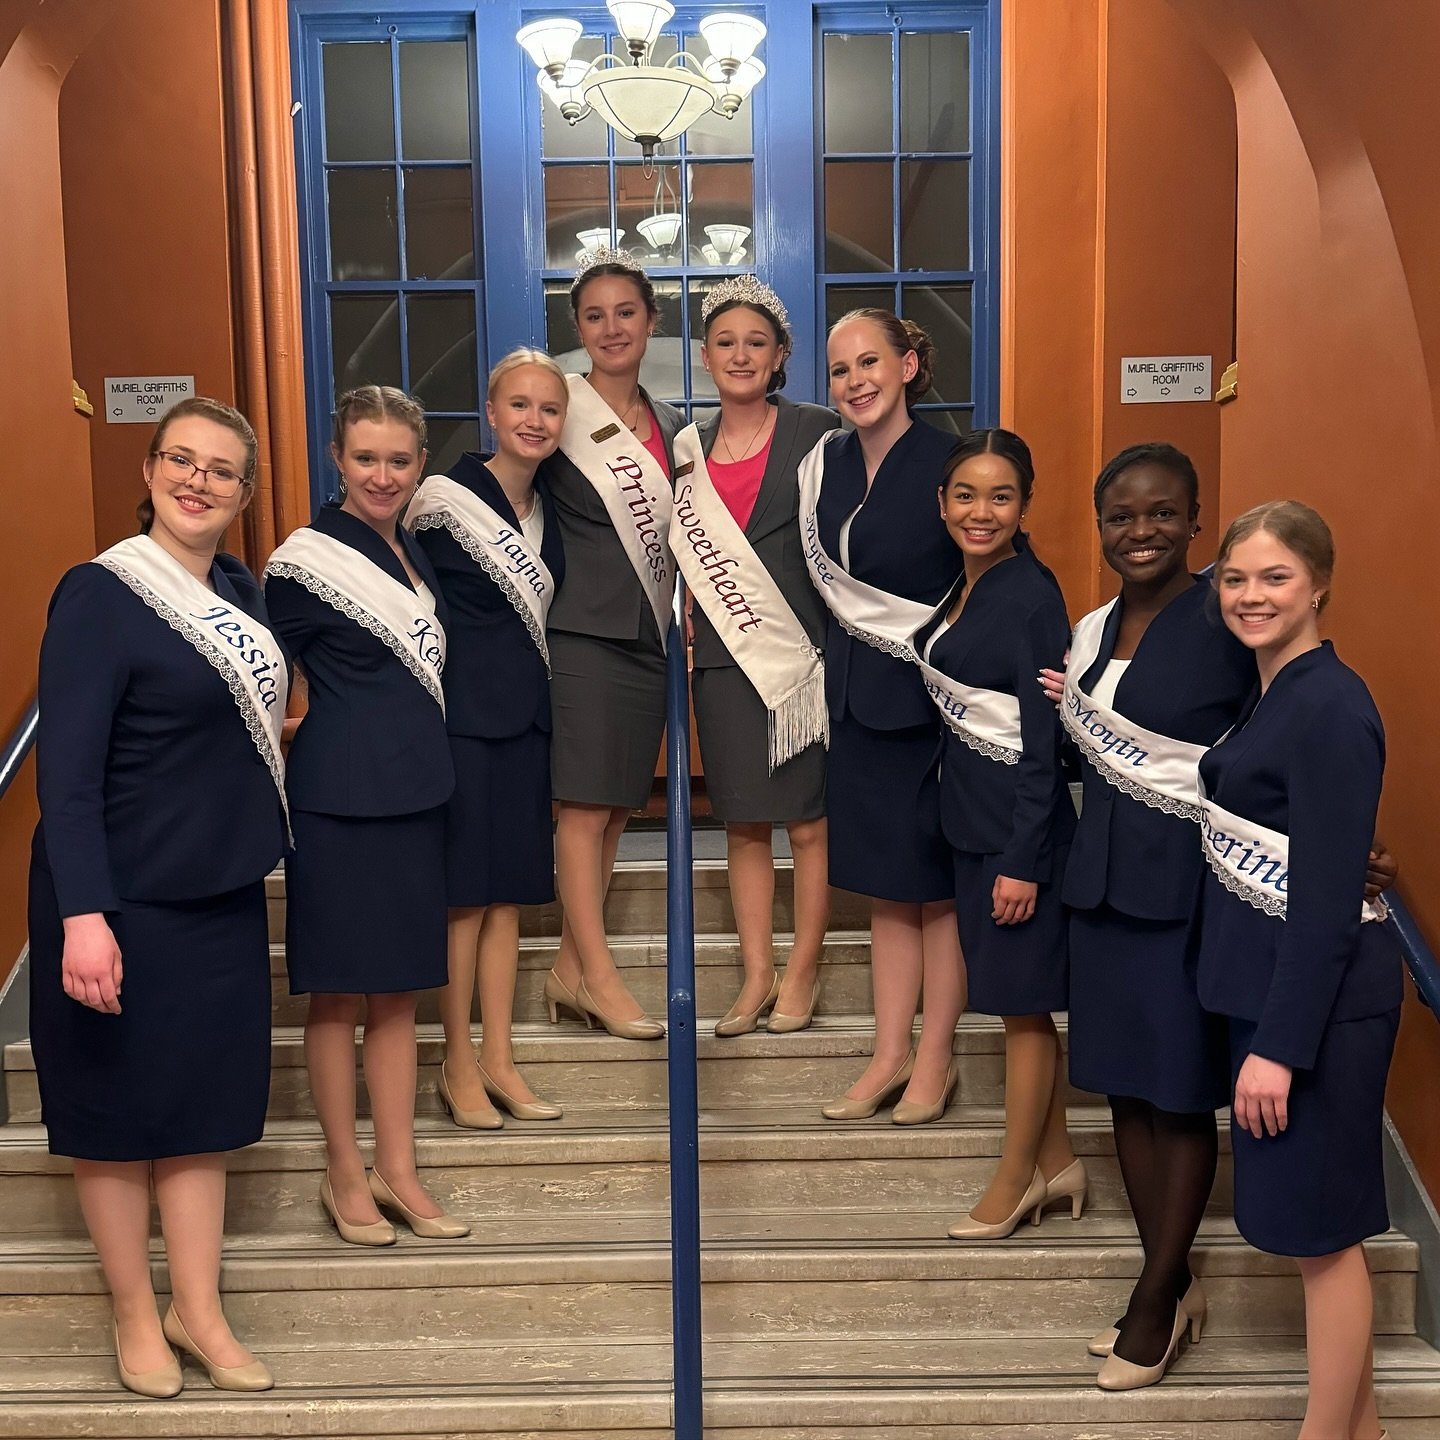 We had a blast kicking off Silver City Days in Trail at the Miss Trail Pageant. From fantastic speeches to creative talents, it was an amazing night. Congratulations to the new ambassador team and to all the candidates on a job well done!
#cranbrooky